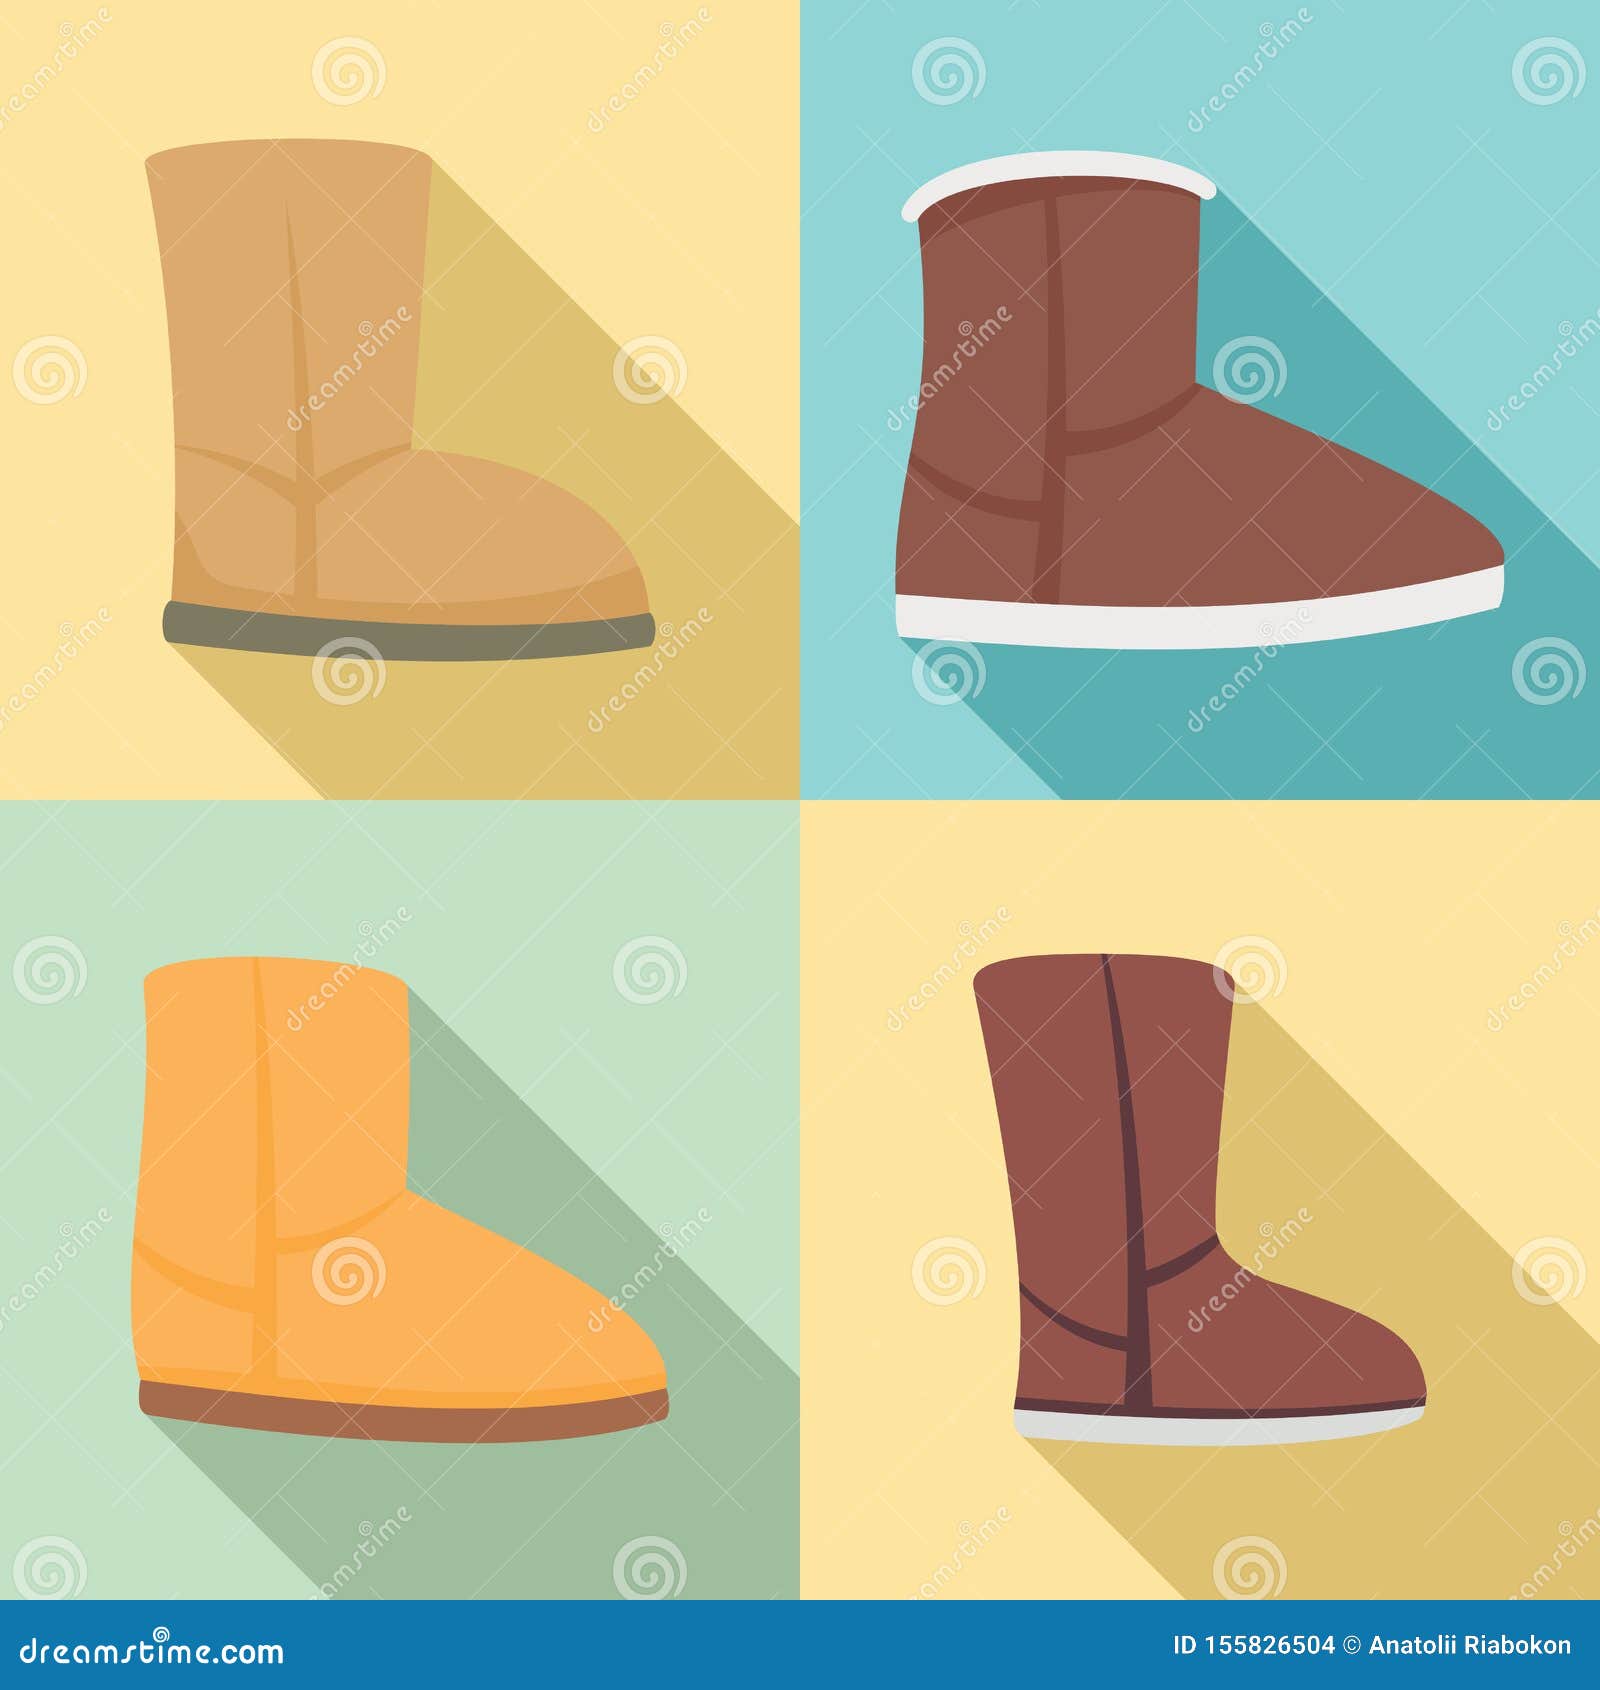 Ugg Boots Icons Set, Flat Style Stock Vector - Illustration of boots ...